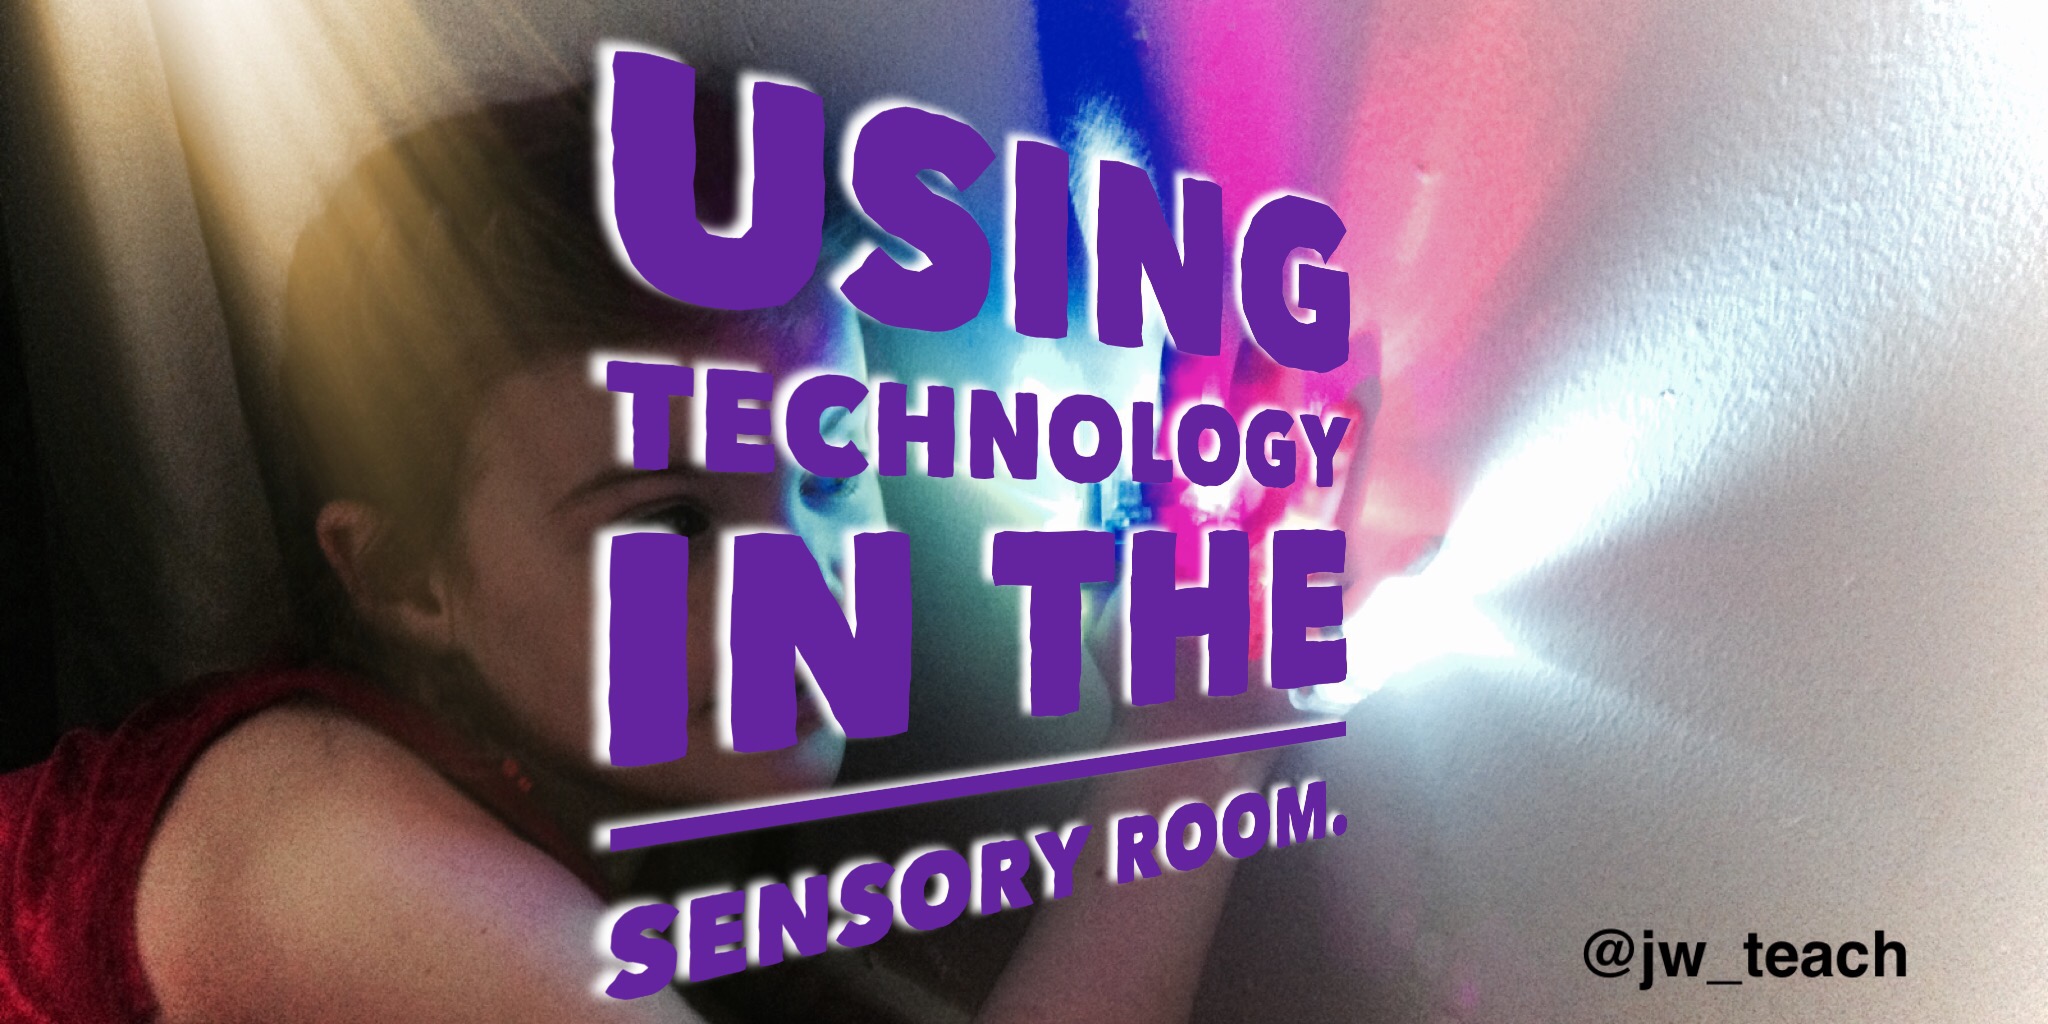 Using Ipads with SEN pupils in the Sensory Room